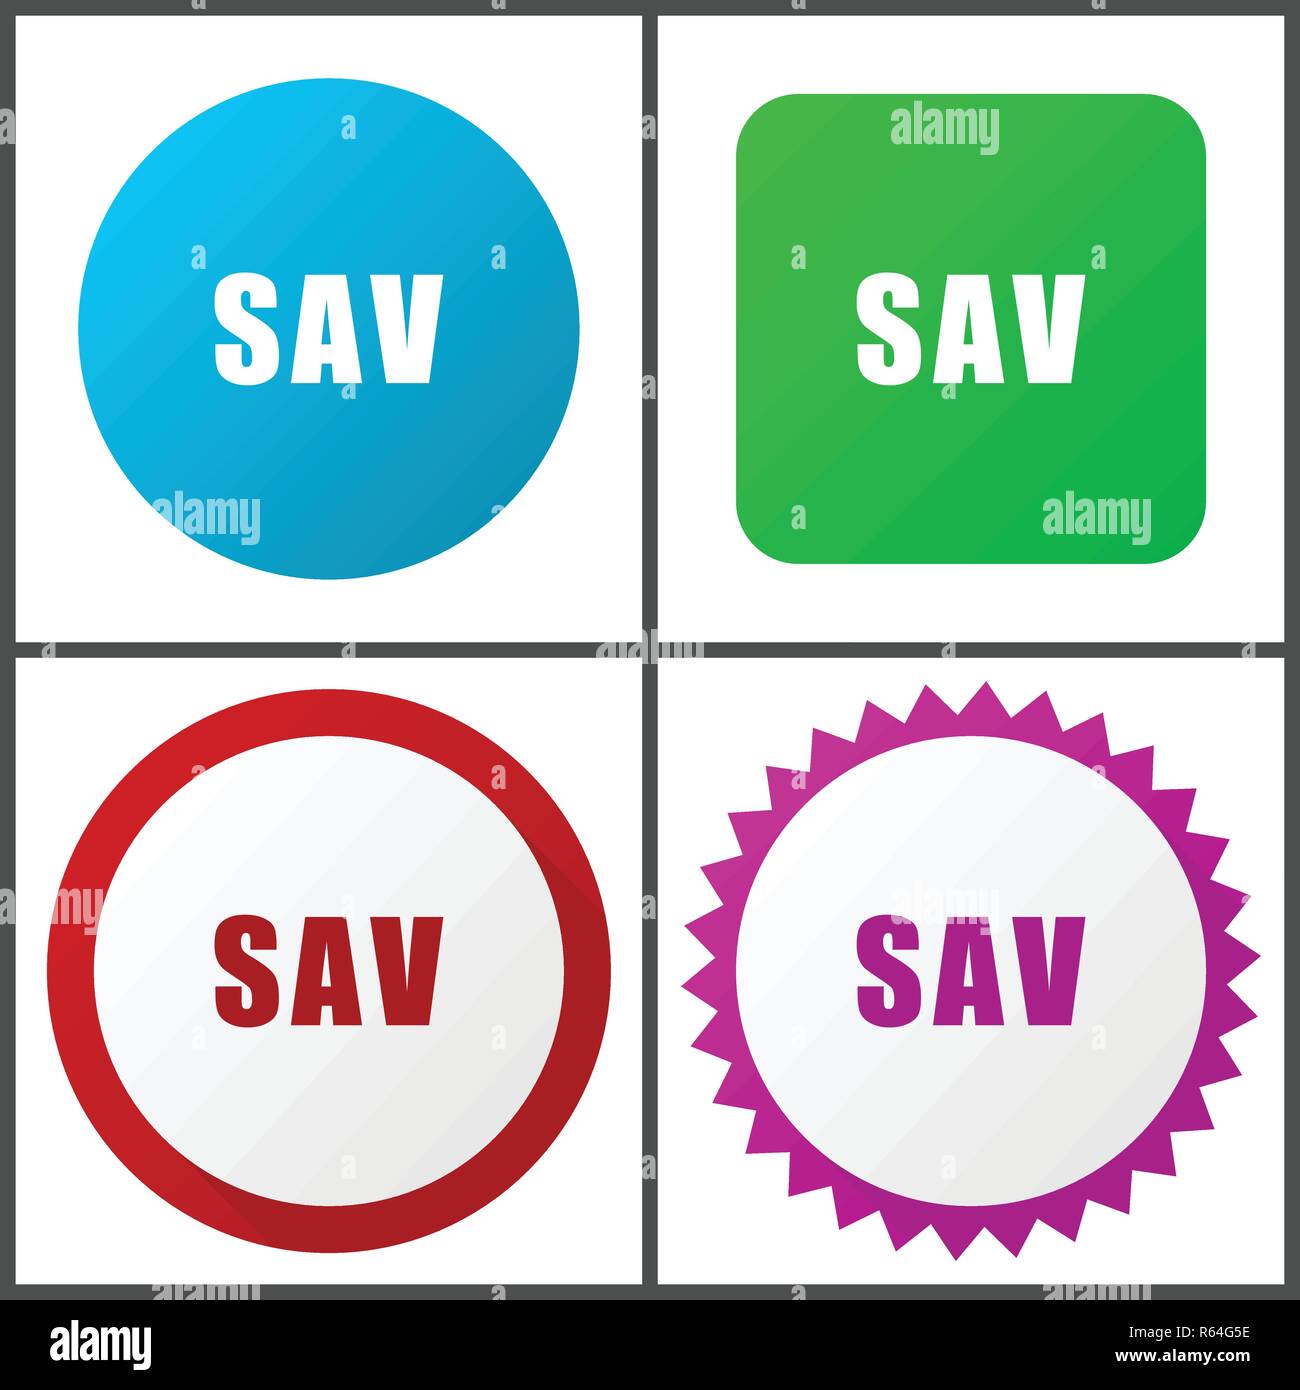 Sav red, blue, green and pink vector icon set. Web icons. Flat design signs and symbols easy to edit Stock Vector